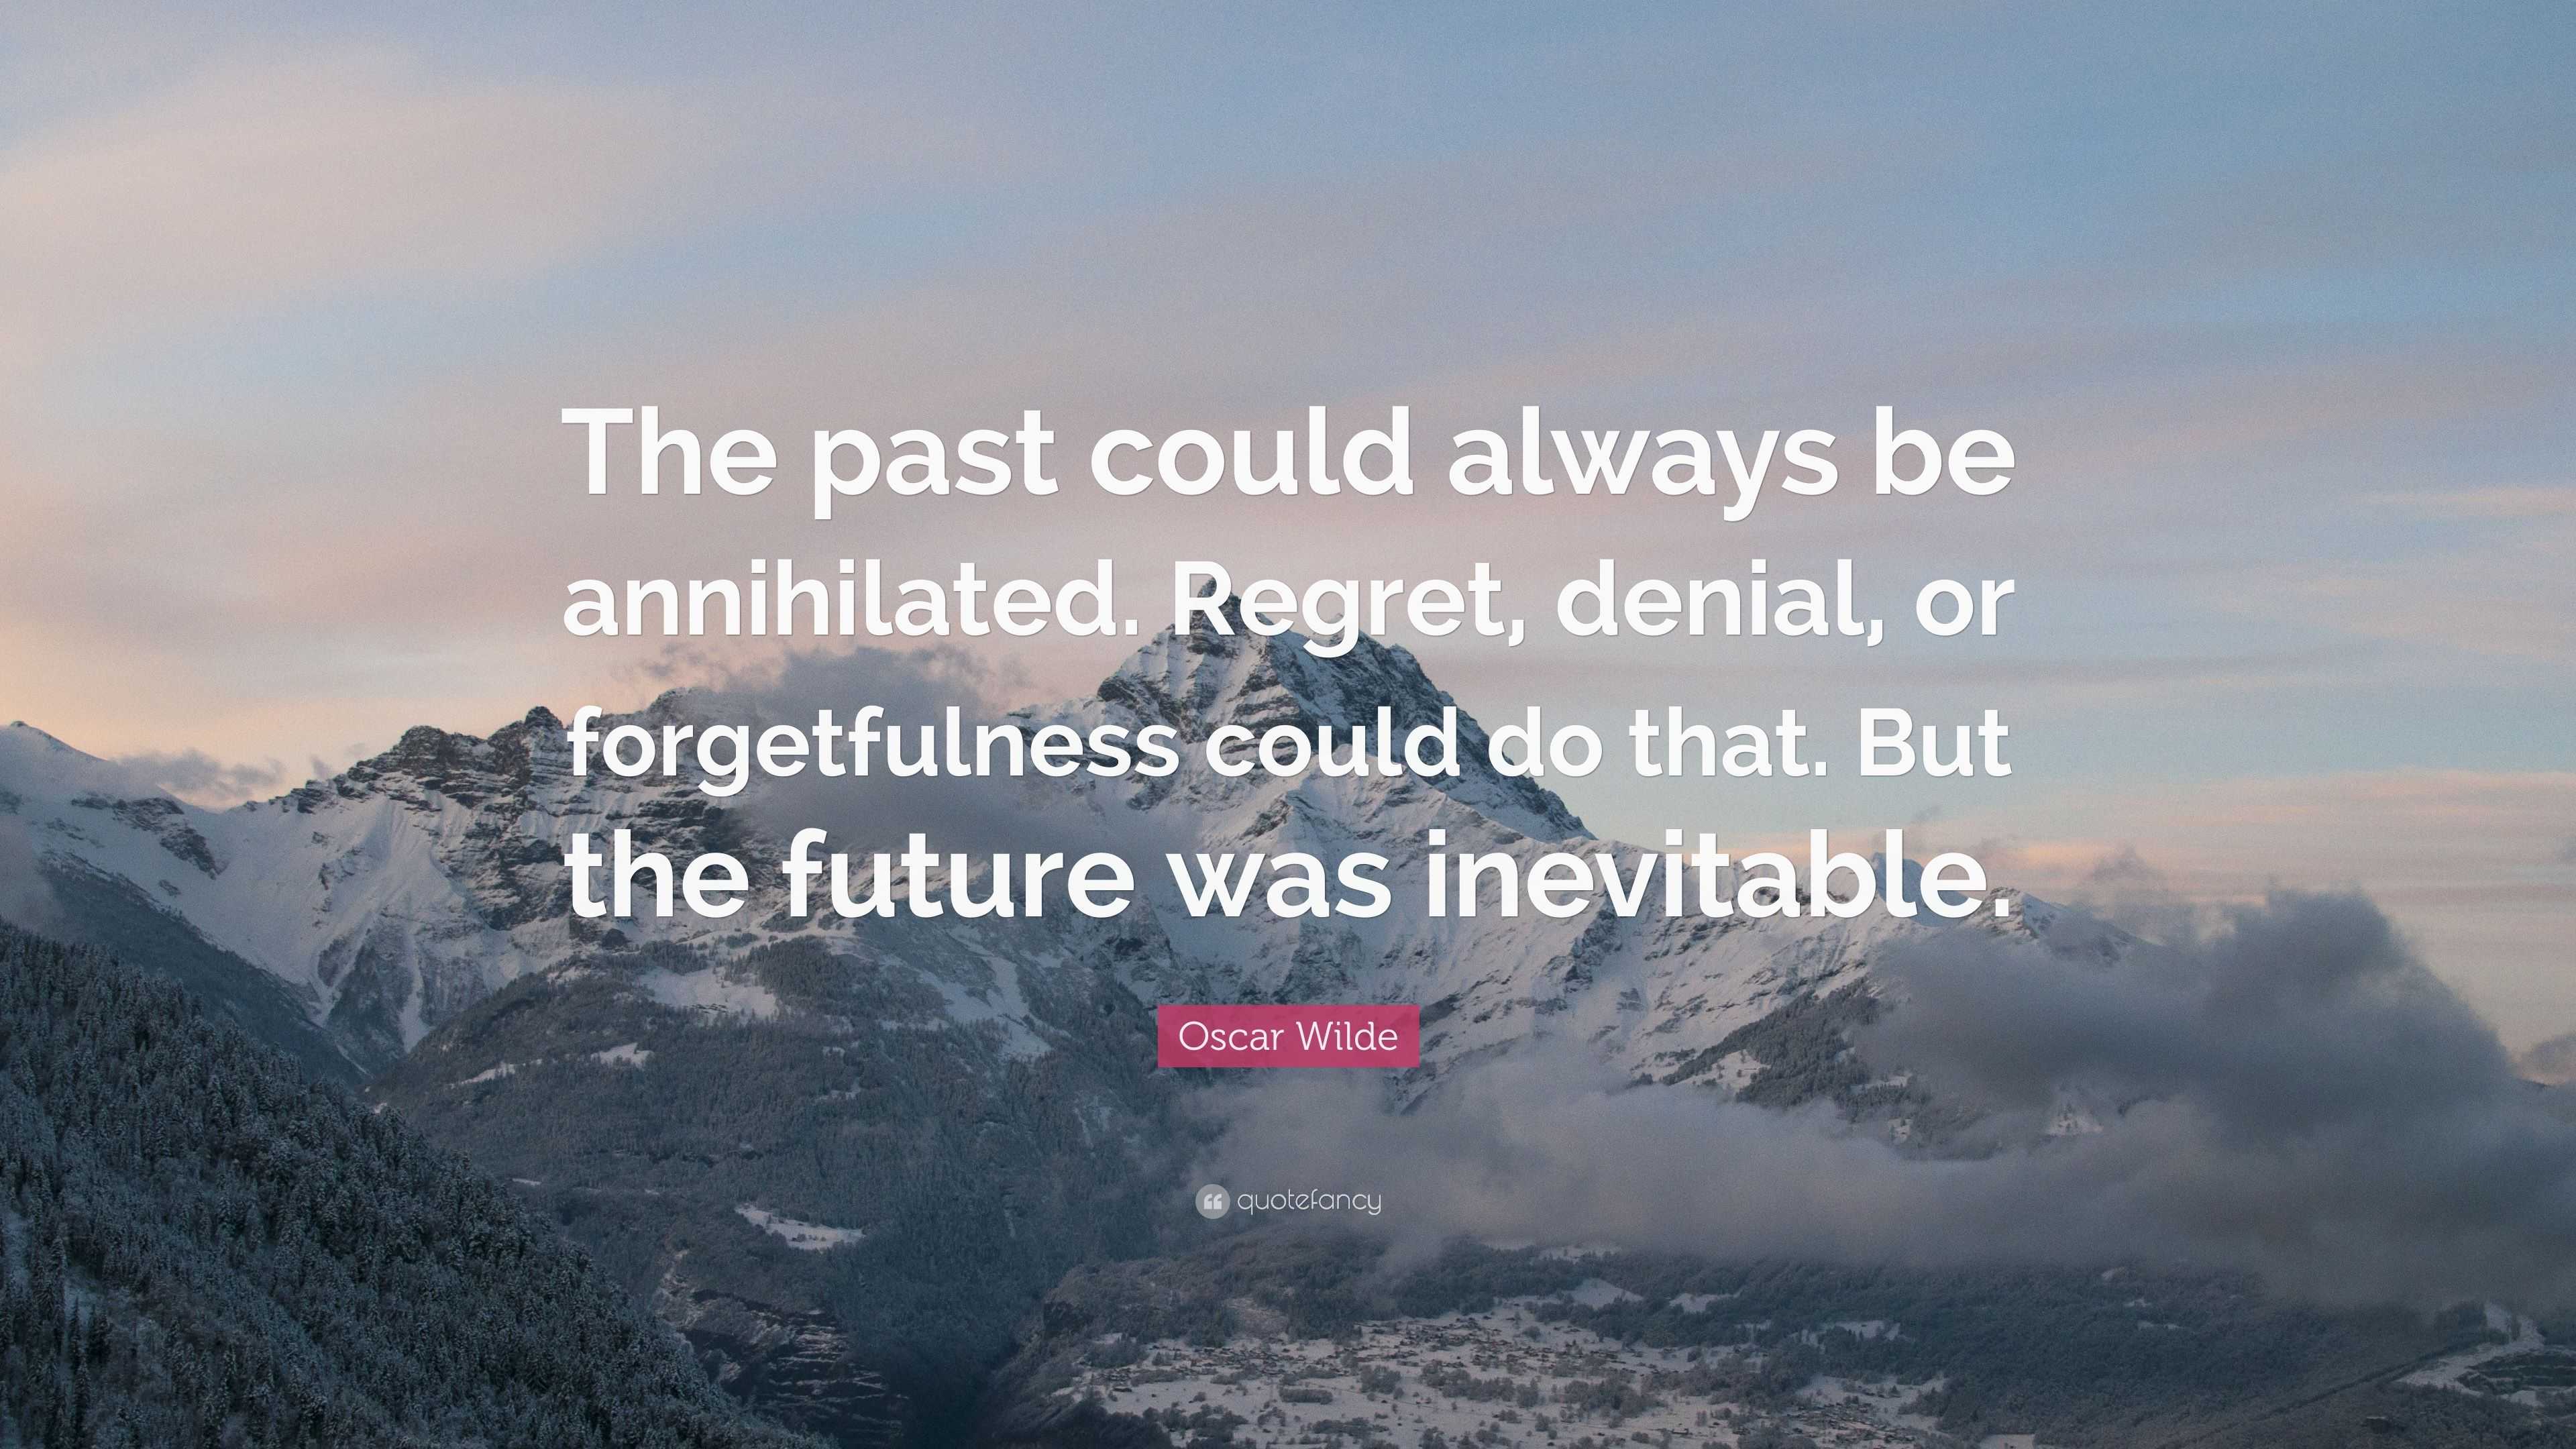 Oscar Wilde Quote: “The past could always be annihilated. Regret ...